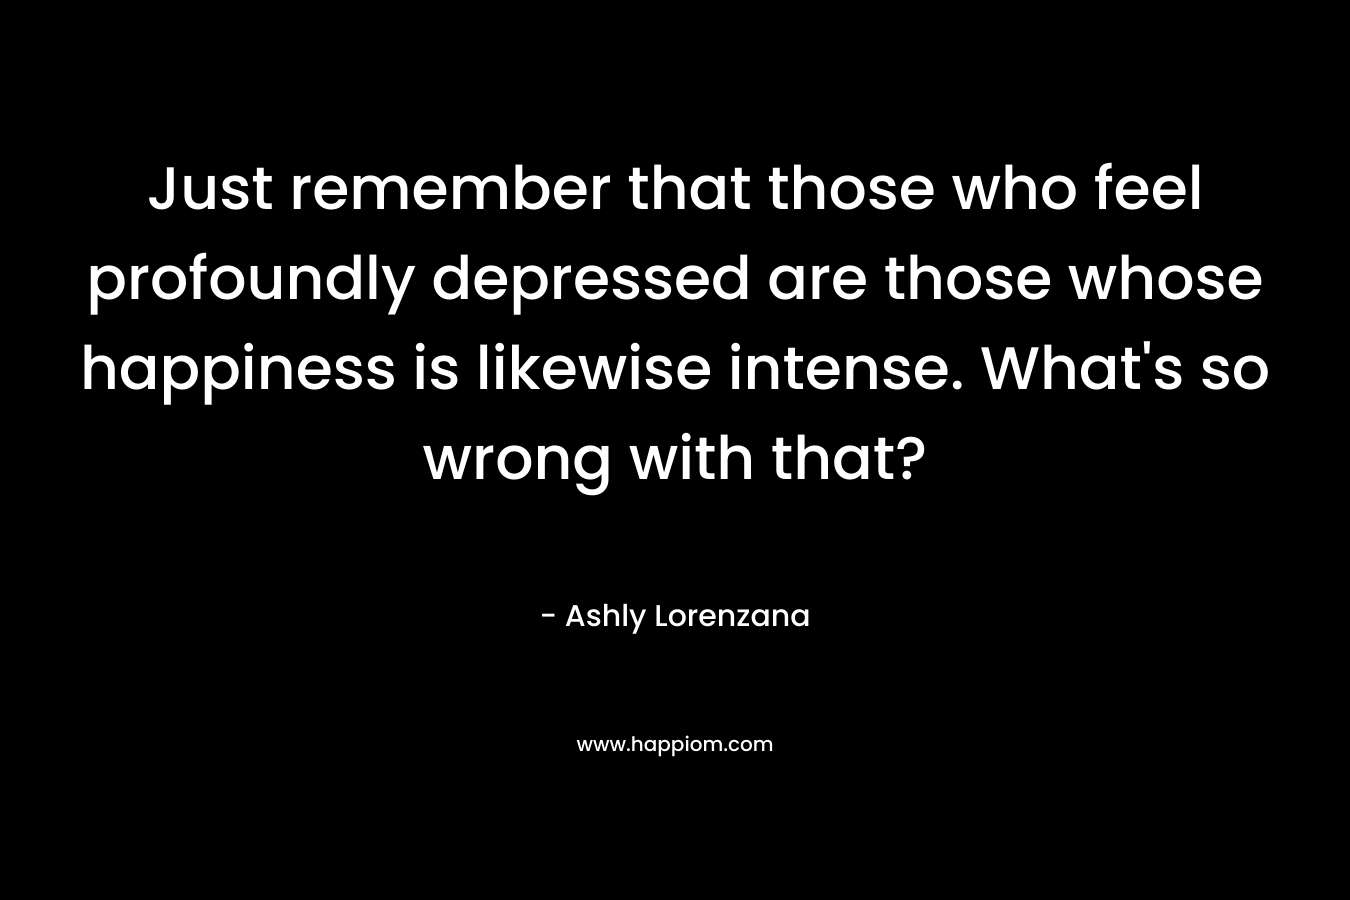 Just remember that those who feel profoundly depressed are those whose happiness is likewise intense. What’s so wrong with that? – Ashly Lorenzana